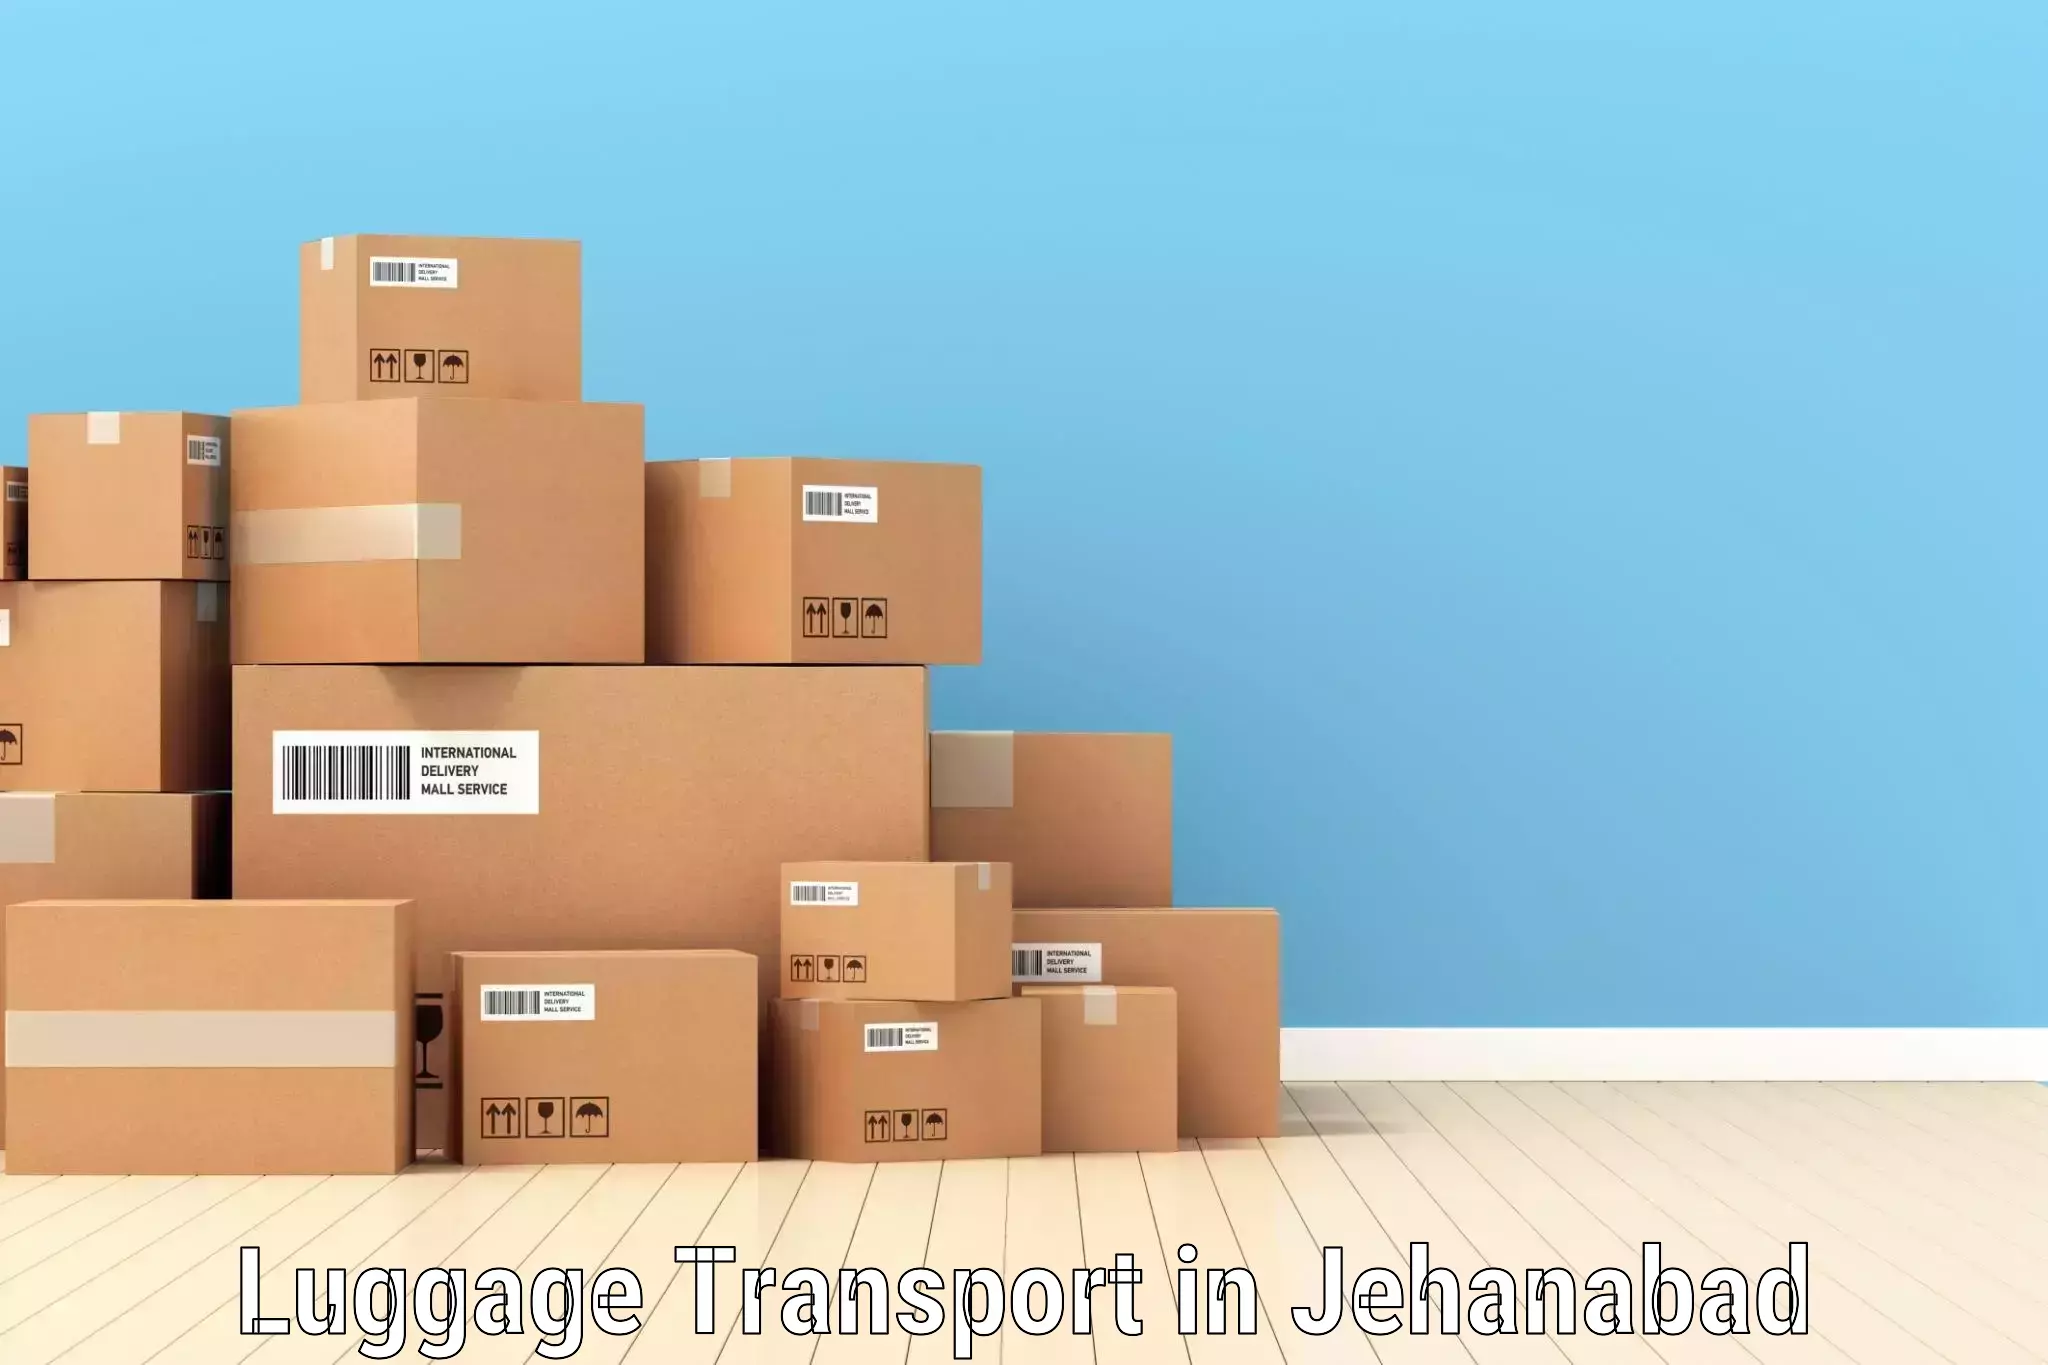 Domestic luggage transport in Jehanabad